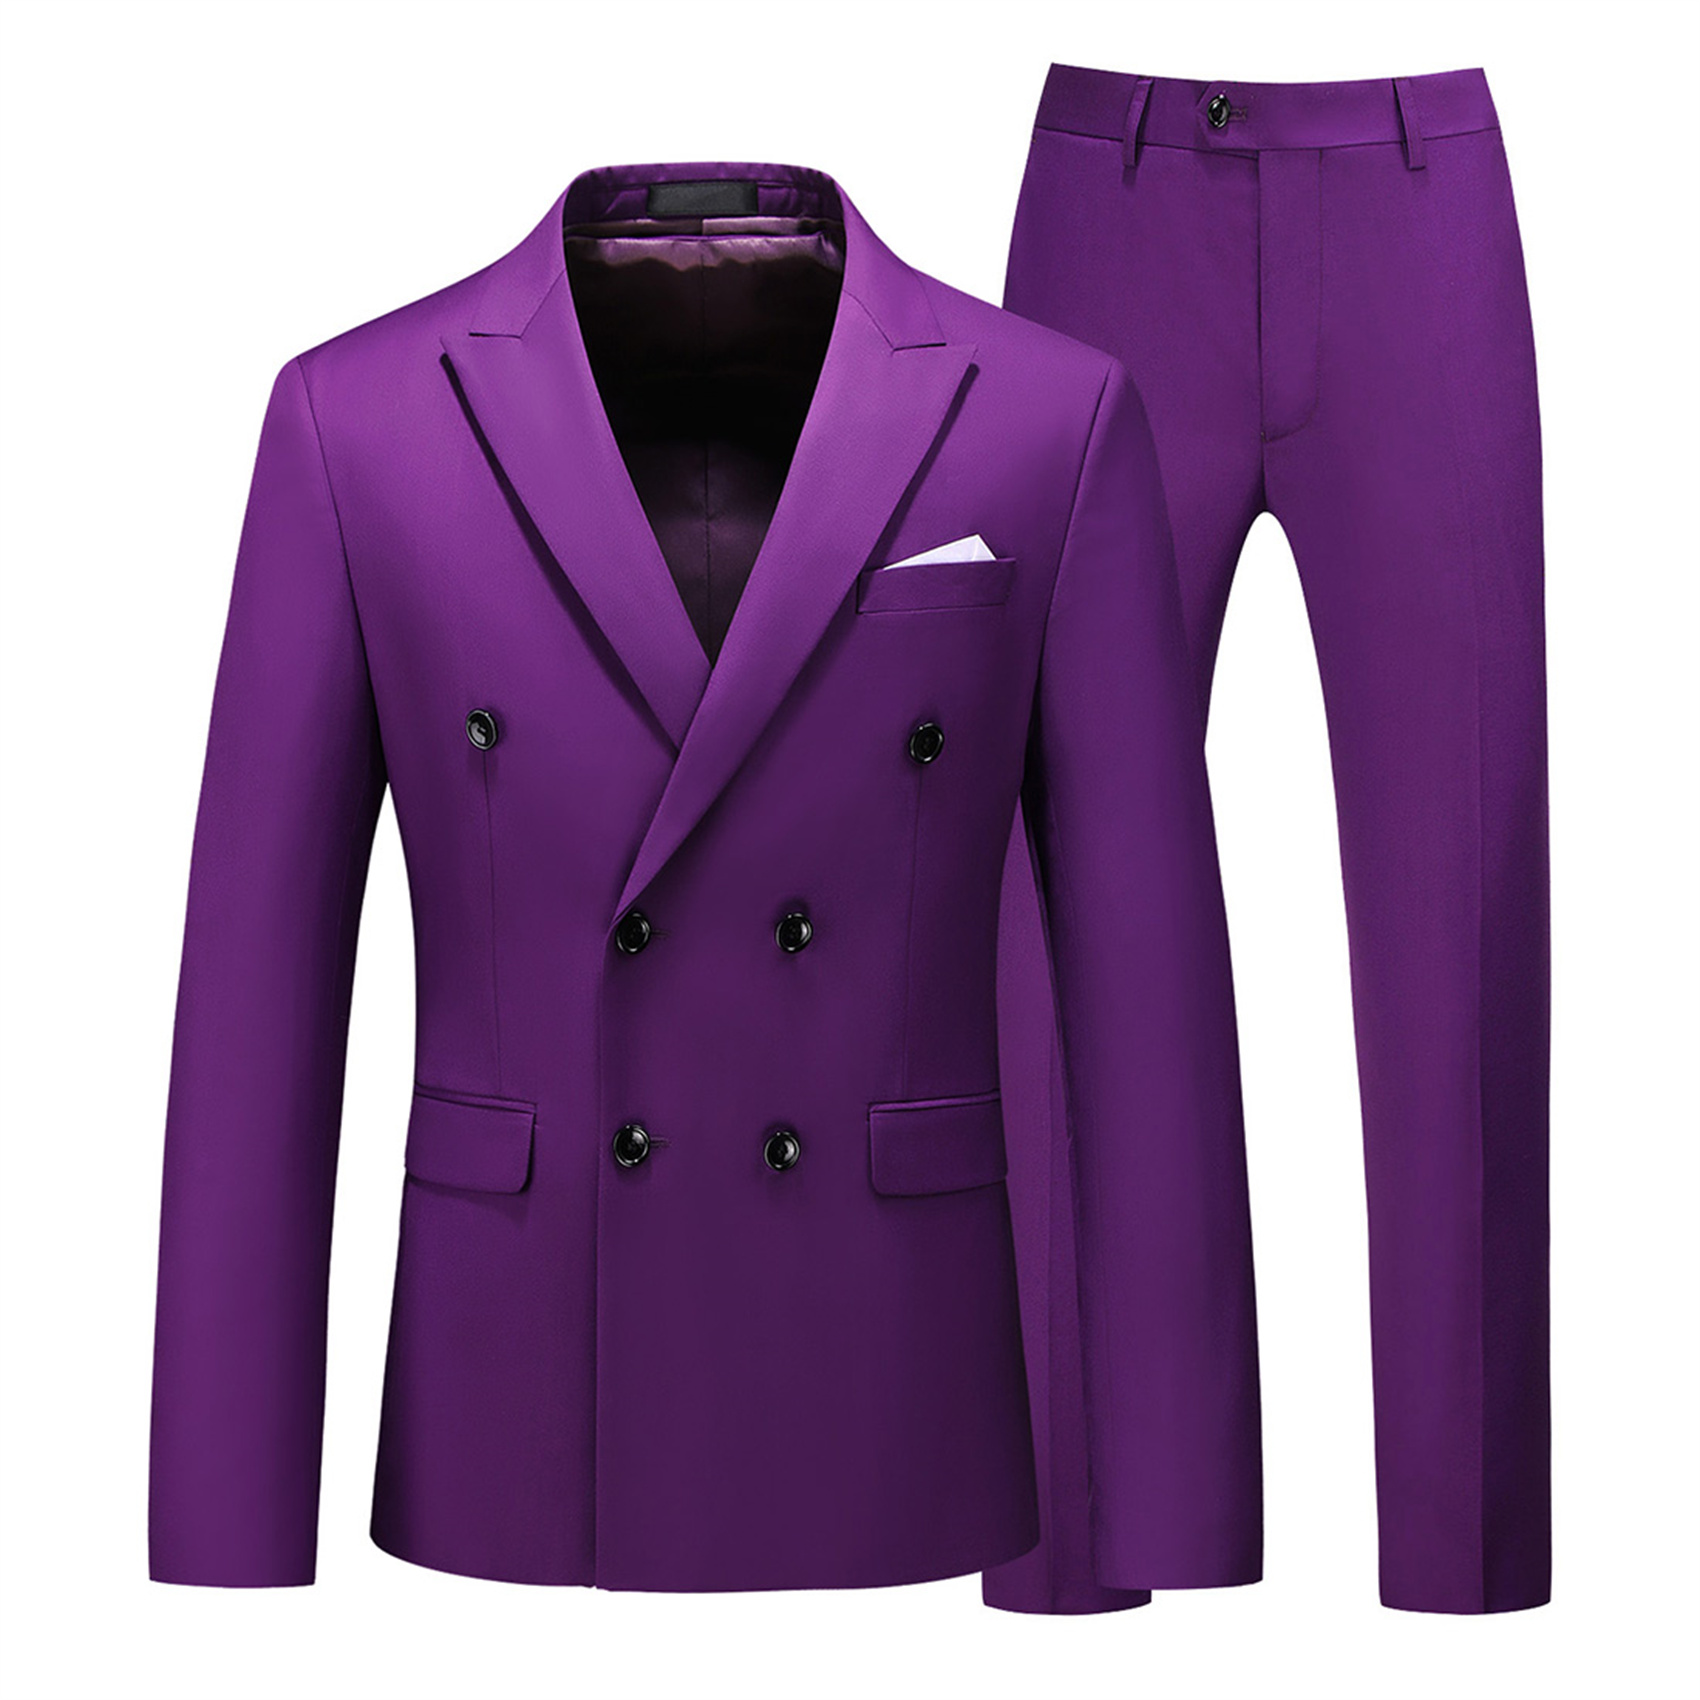 2 Piece Double Breasted Suit for Men, Slim Fit, Purple